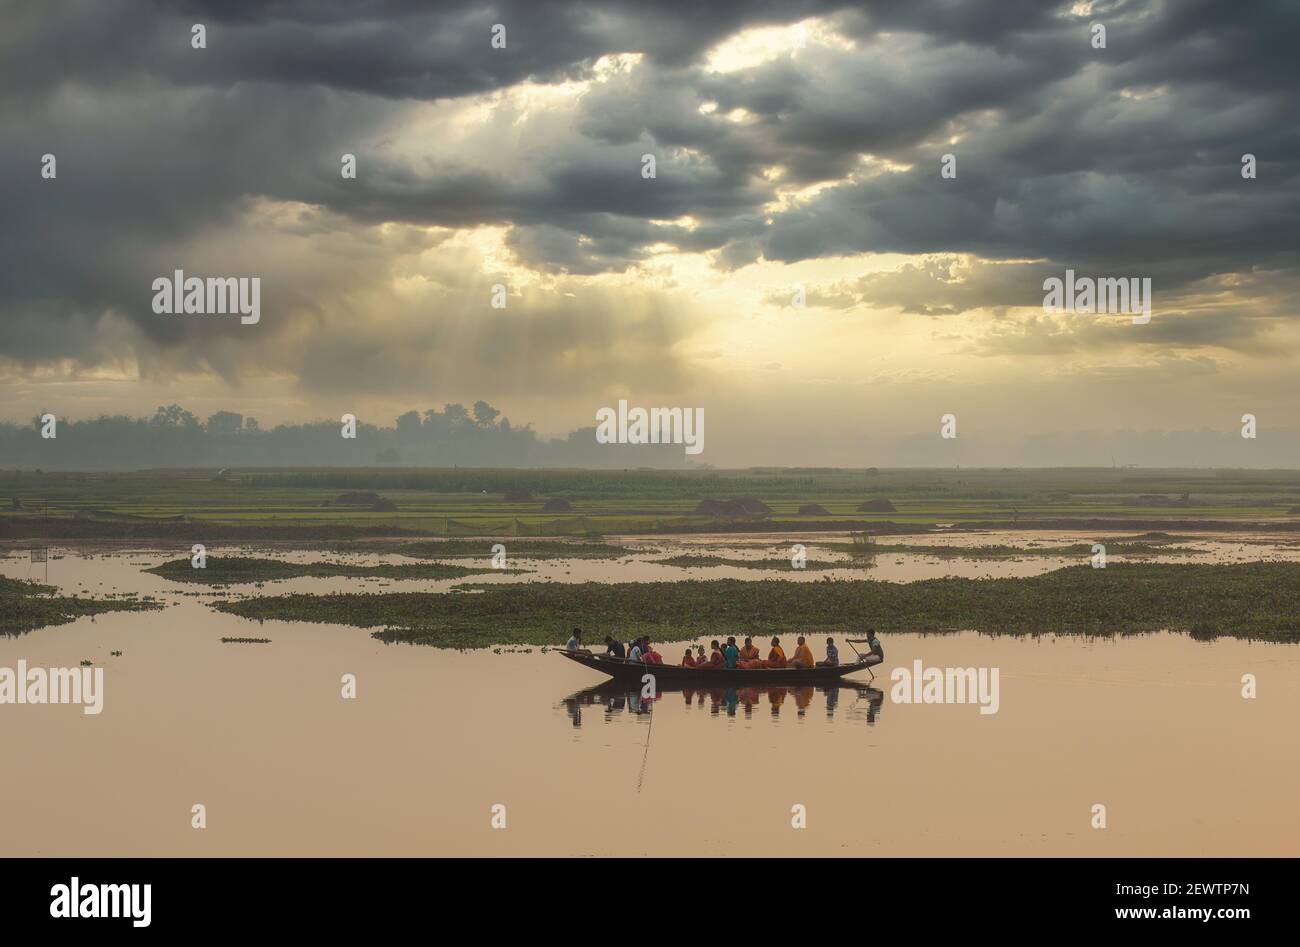 People take ferry ride on a river with rural landscape view at sunset at a village in West Bengal, India Stock Photo